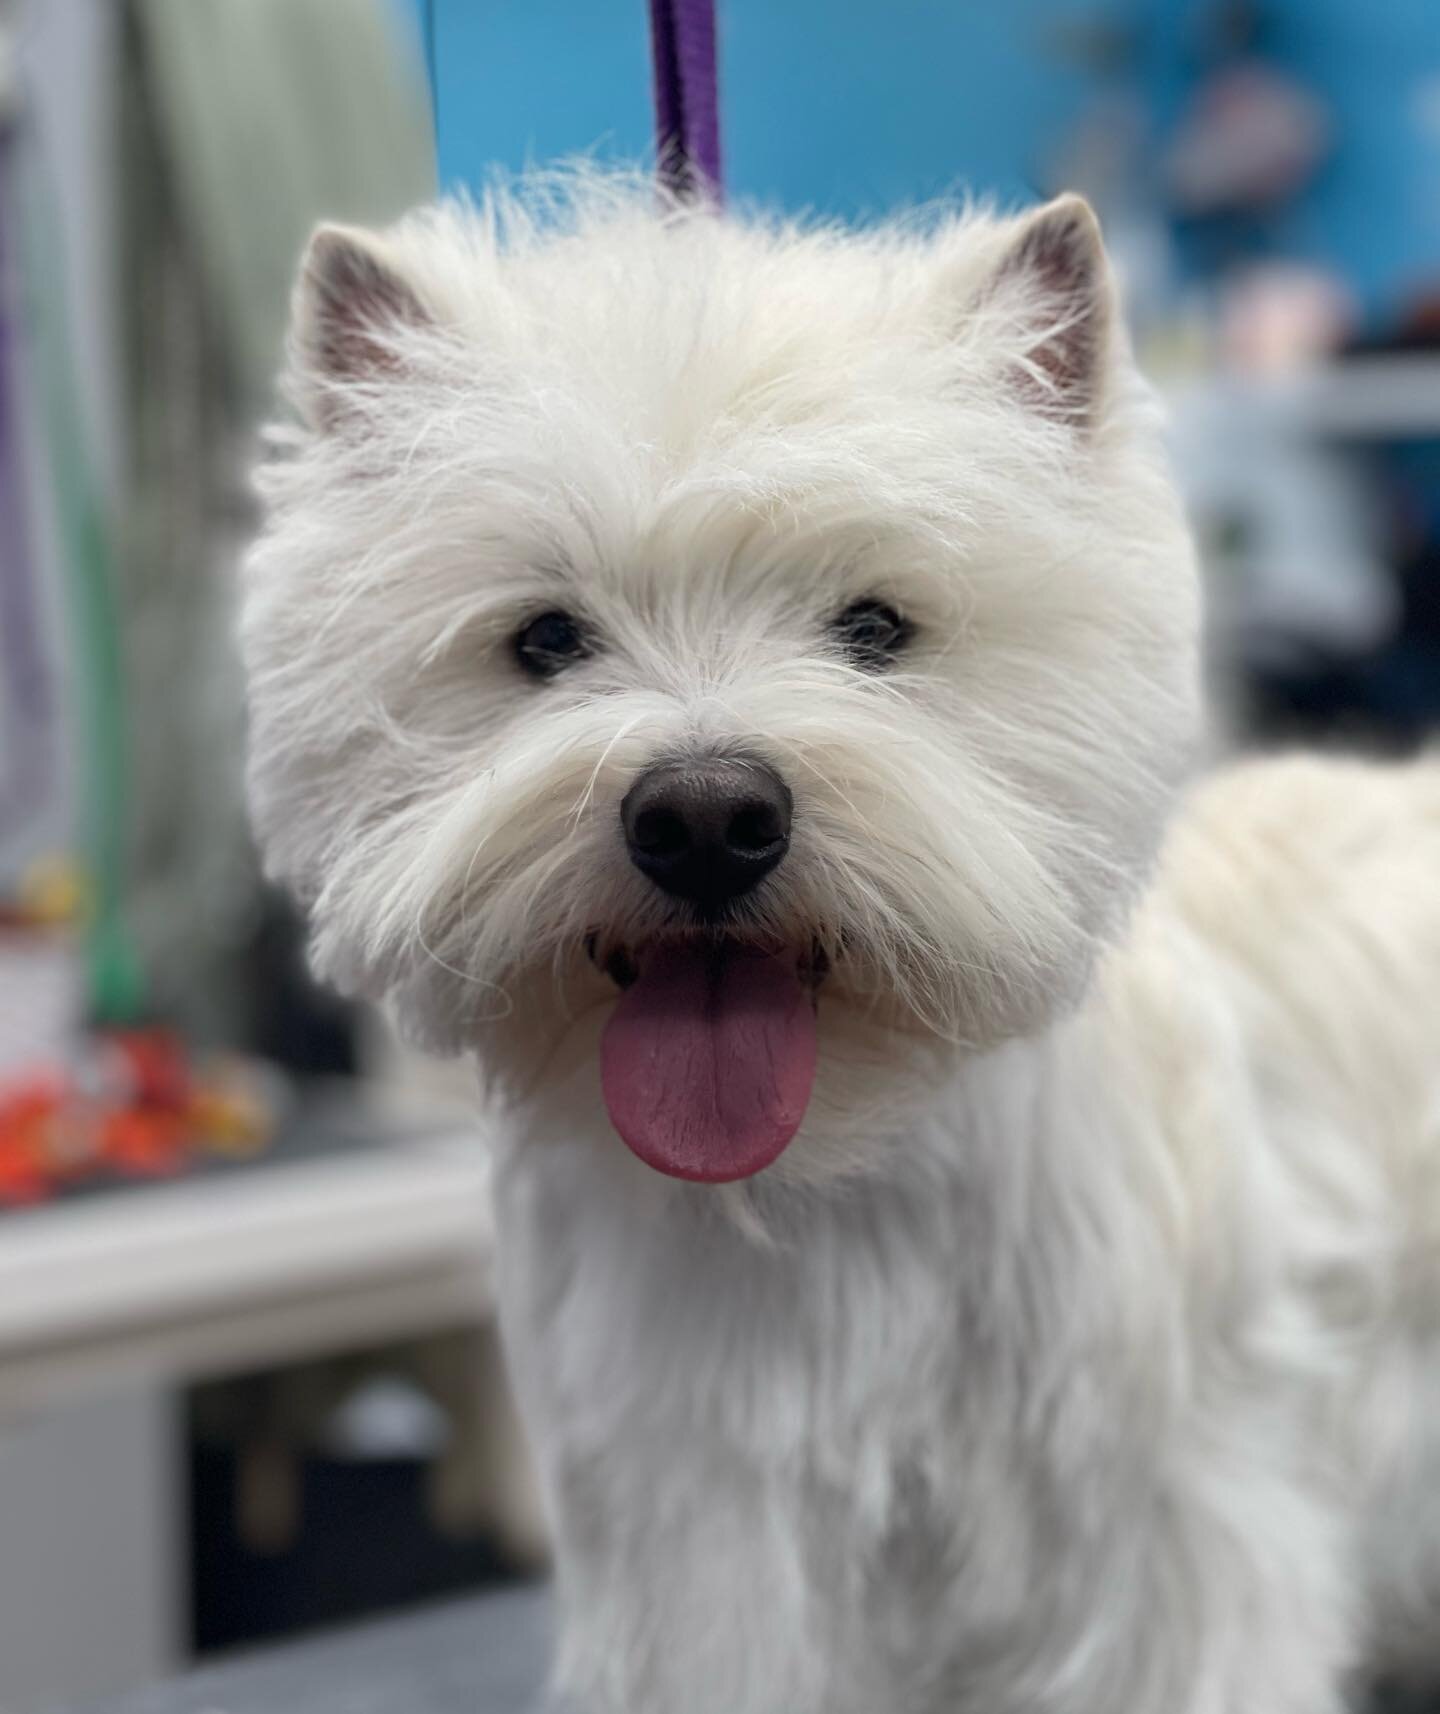 Damon all ready for the holiday #fabfurbtown #handstripping #handstripedwithlove #bloomingtonindianapetgroomers #petgroomers #westies #westhighlandwhiteterrier